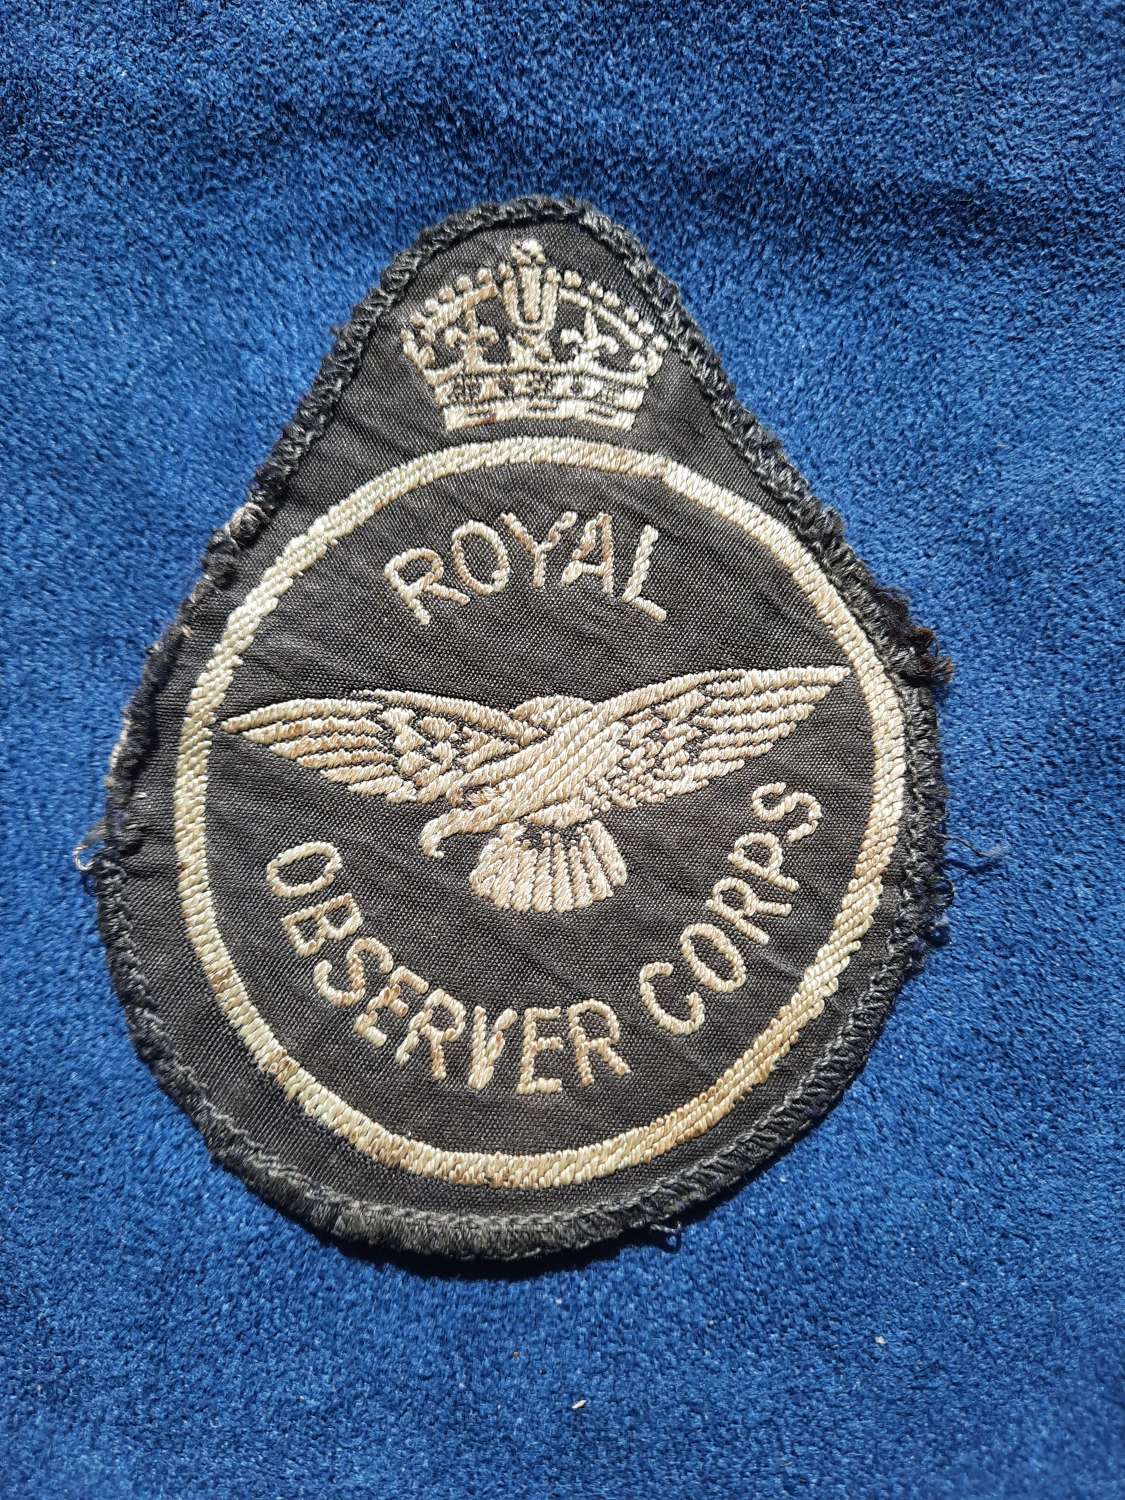 Royal Observer Corps Patch